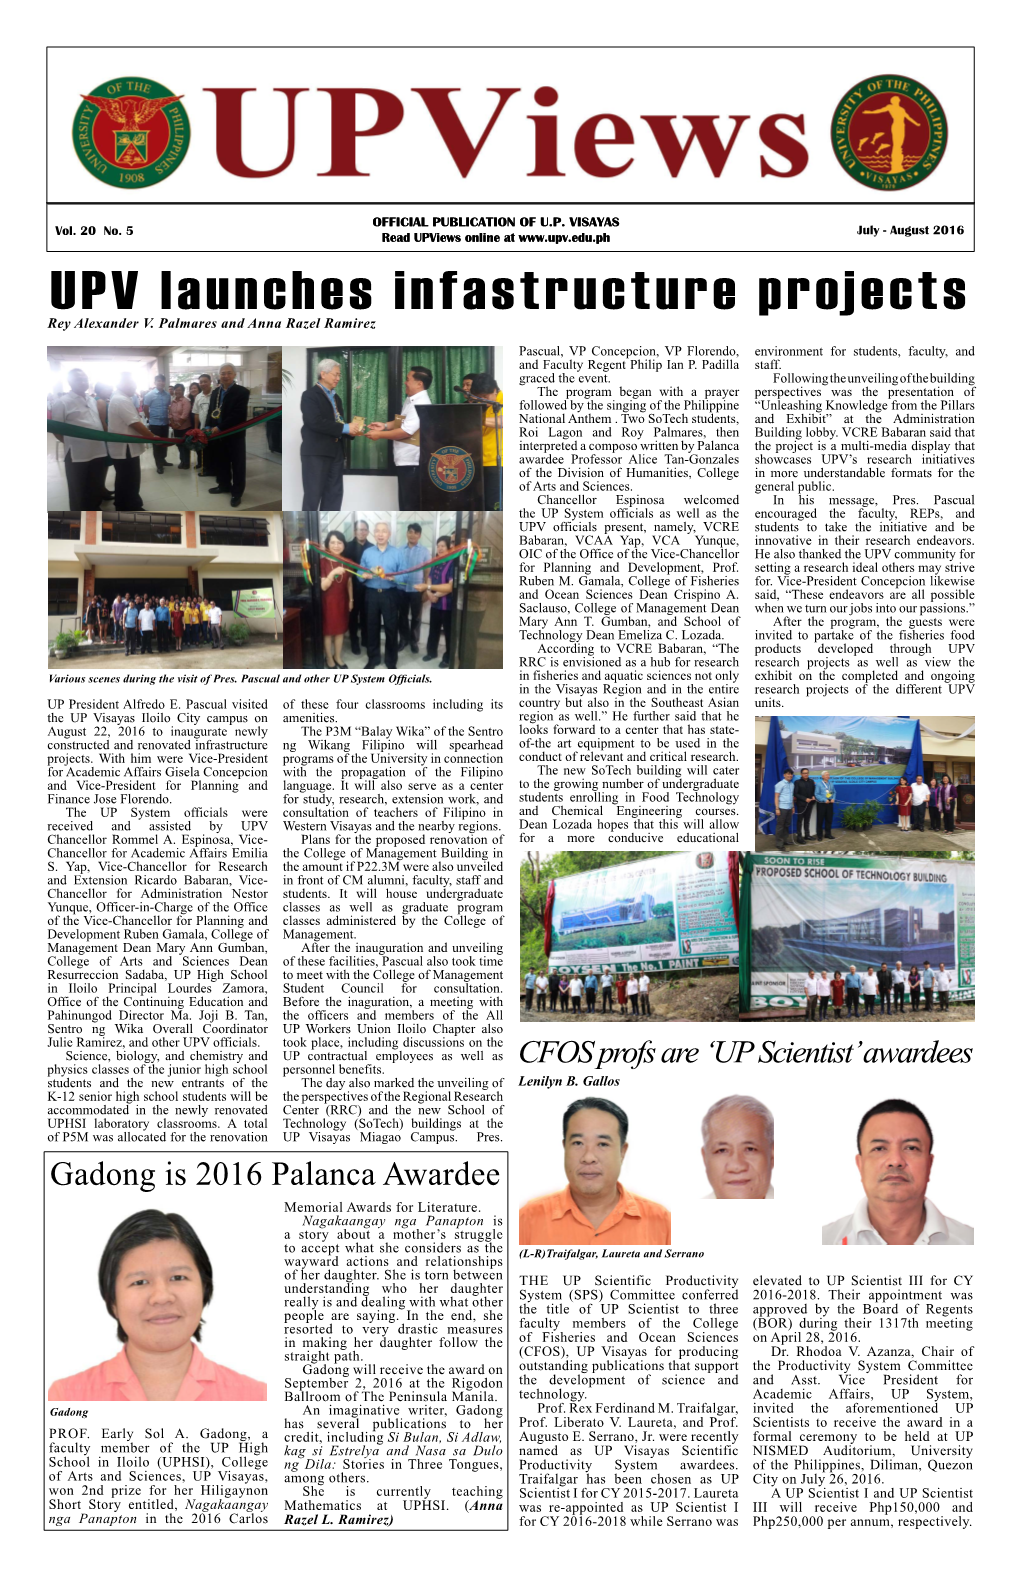 UPV Launches Infastructure Projects Rey Alexander V